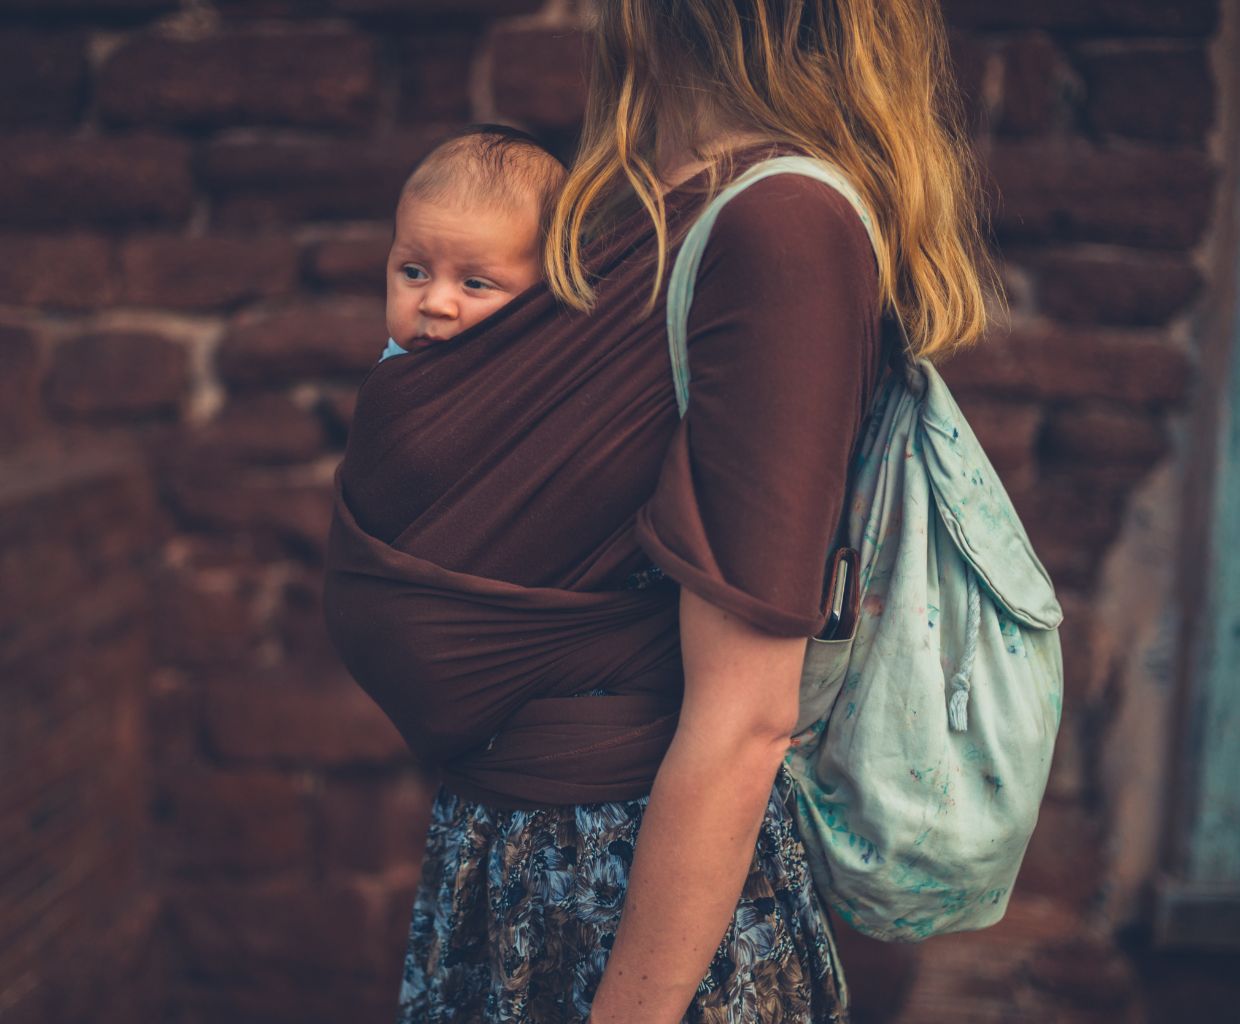 Baby sling - how to carry a baby